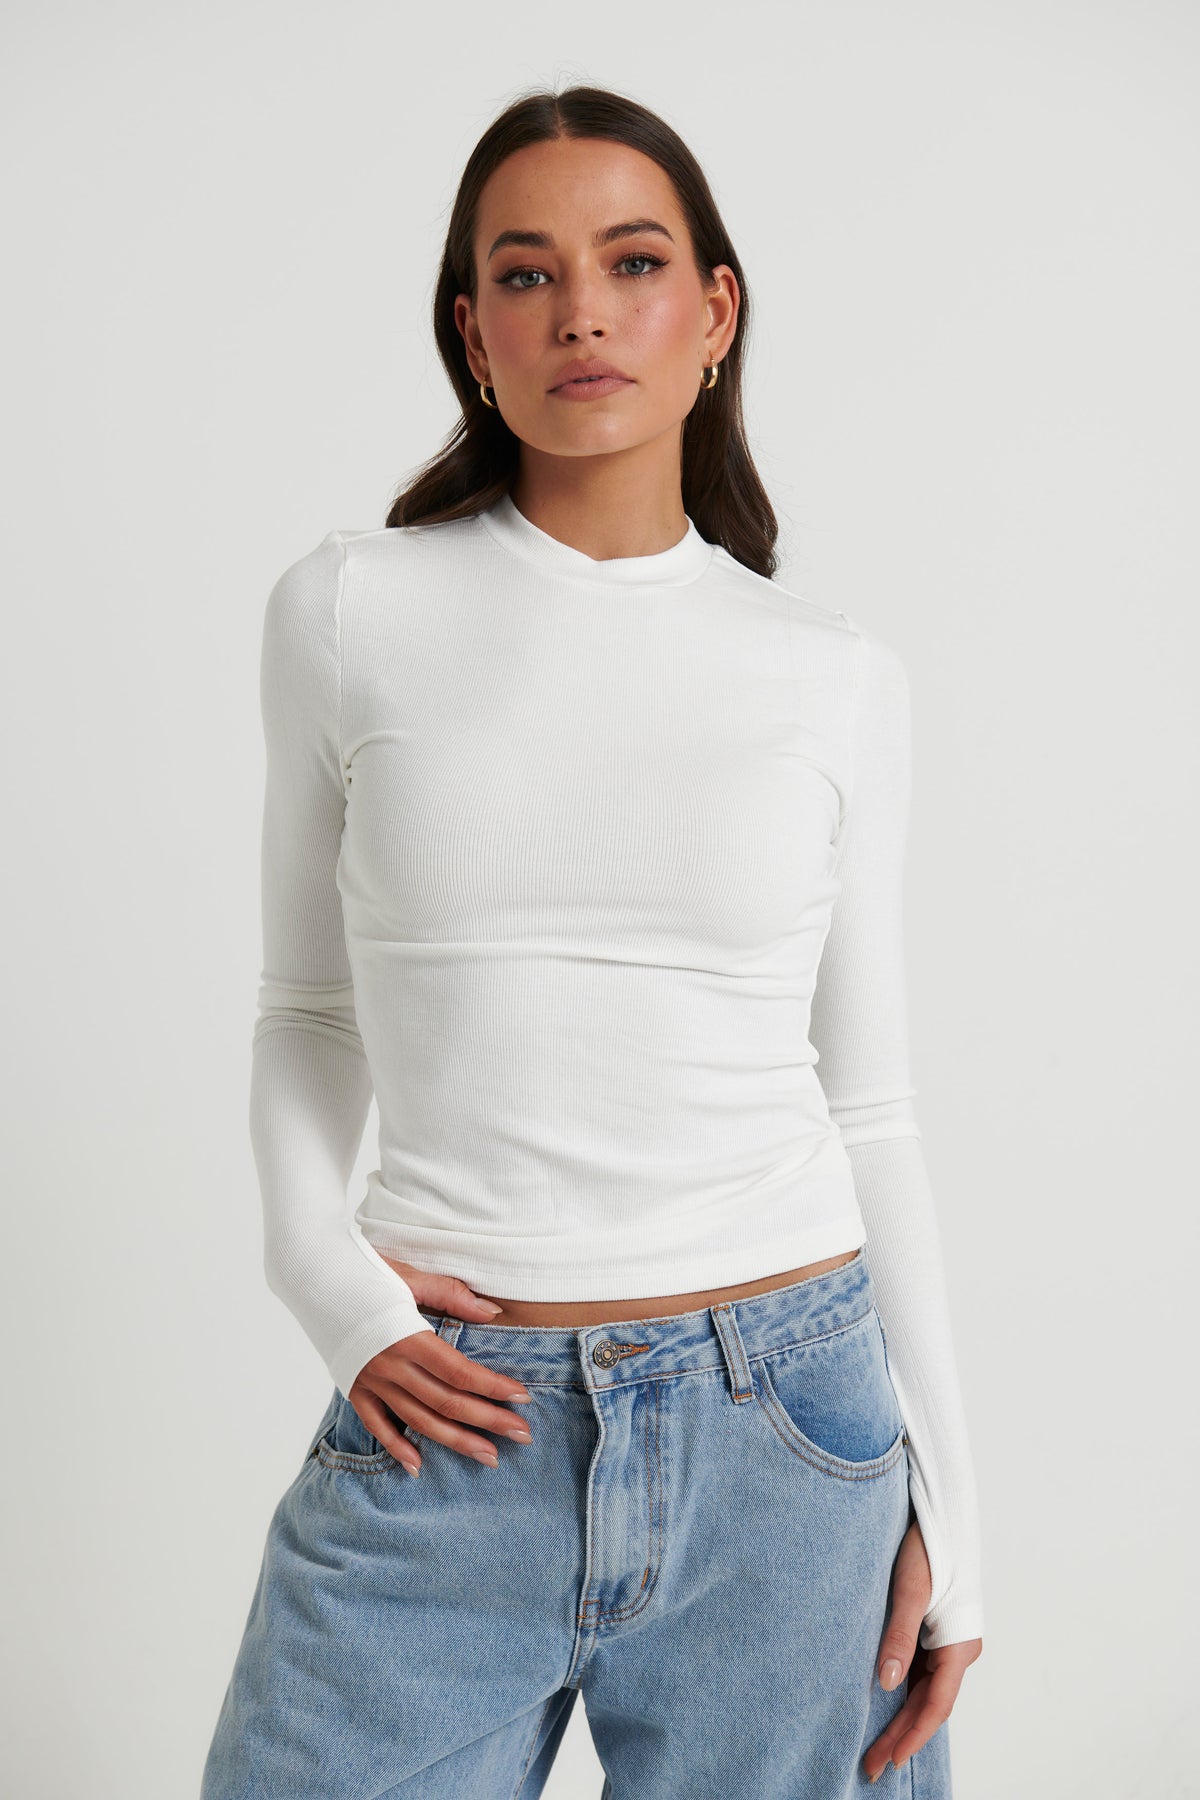 Cassidy Top White